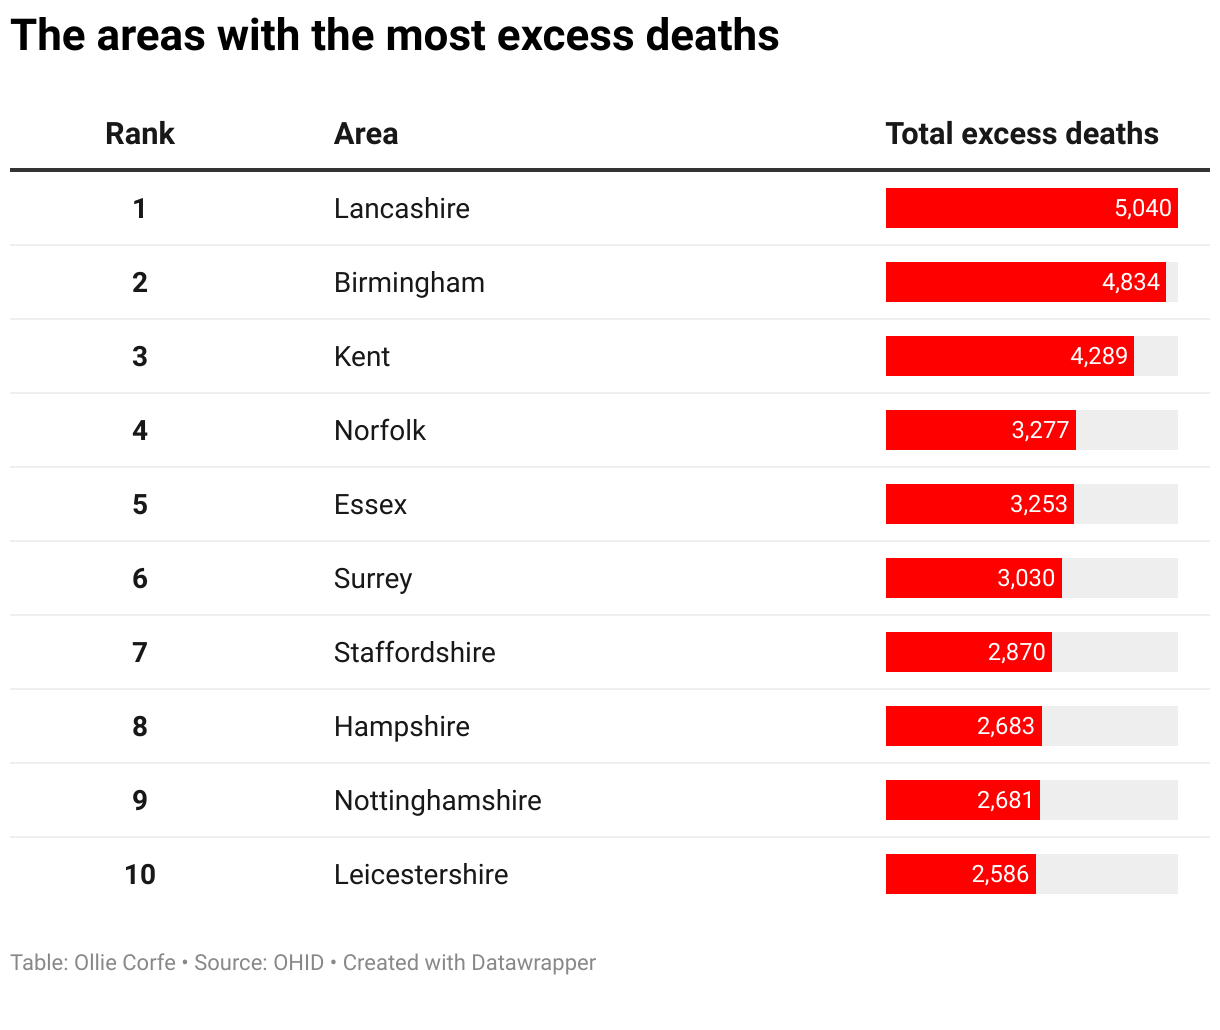 Table of most excess deaths.